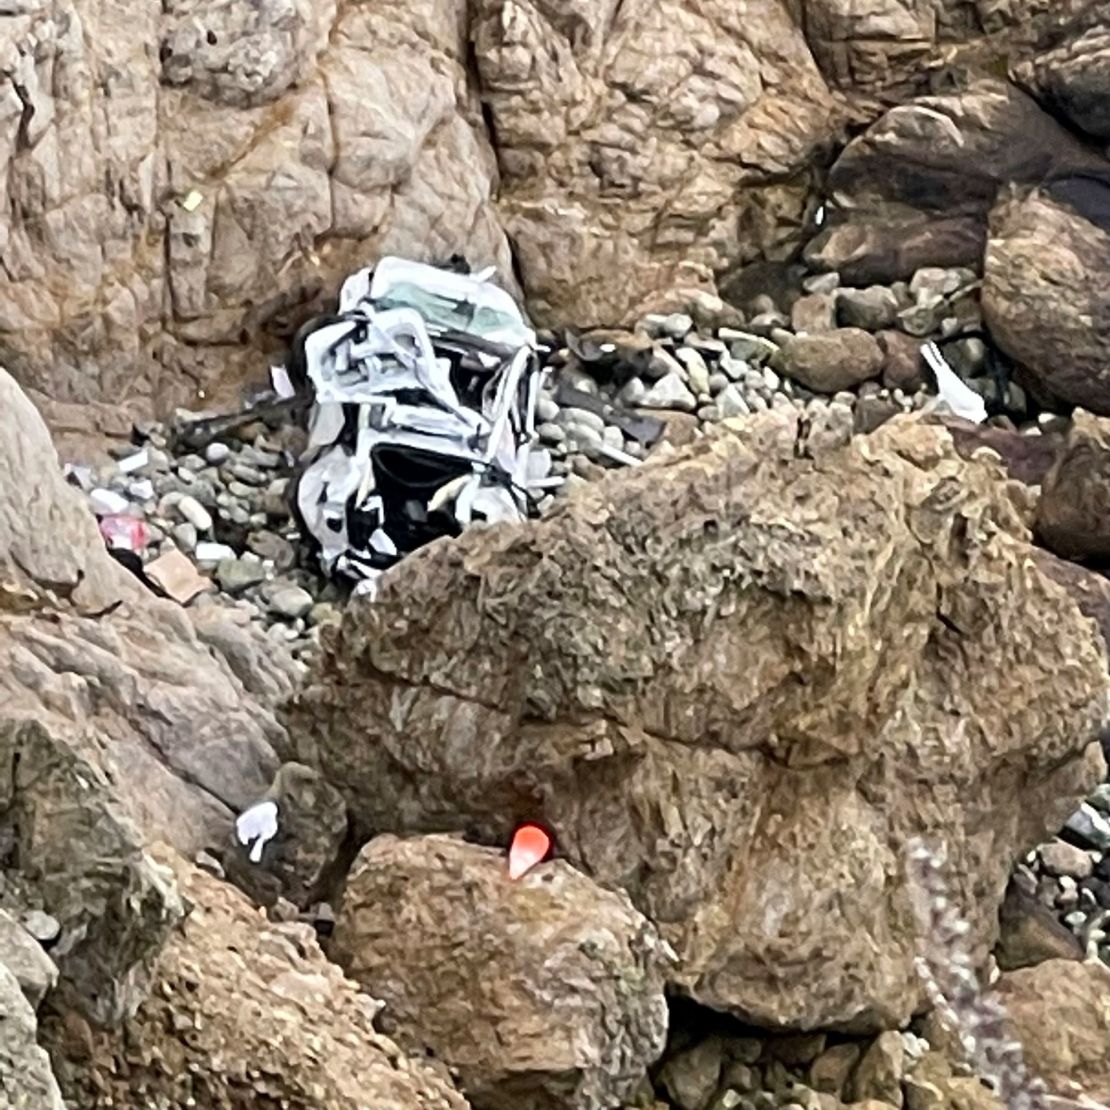 This image provided by the San Mateo County Sheriff's Office shows the Tesla on a rocky beach below the cliffs, an area called Devil's Slide. 